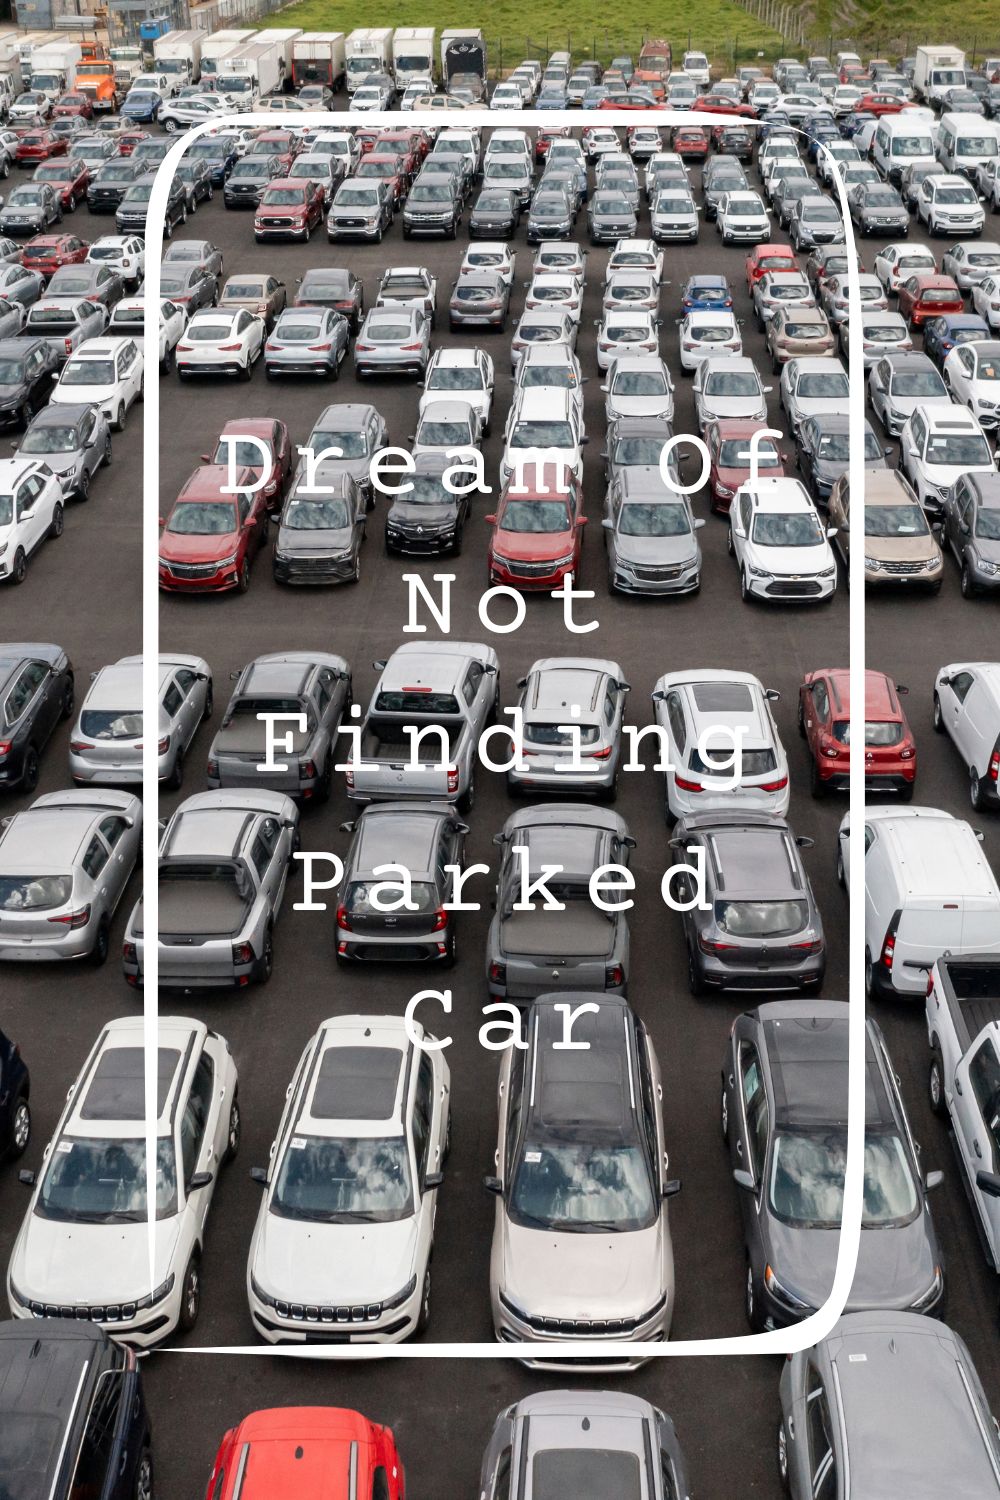 8 Dream Of Not Finding Parked Car Meanings4